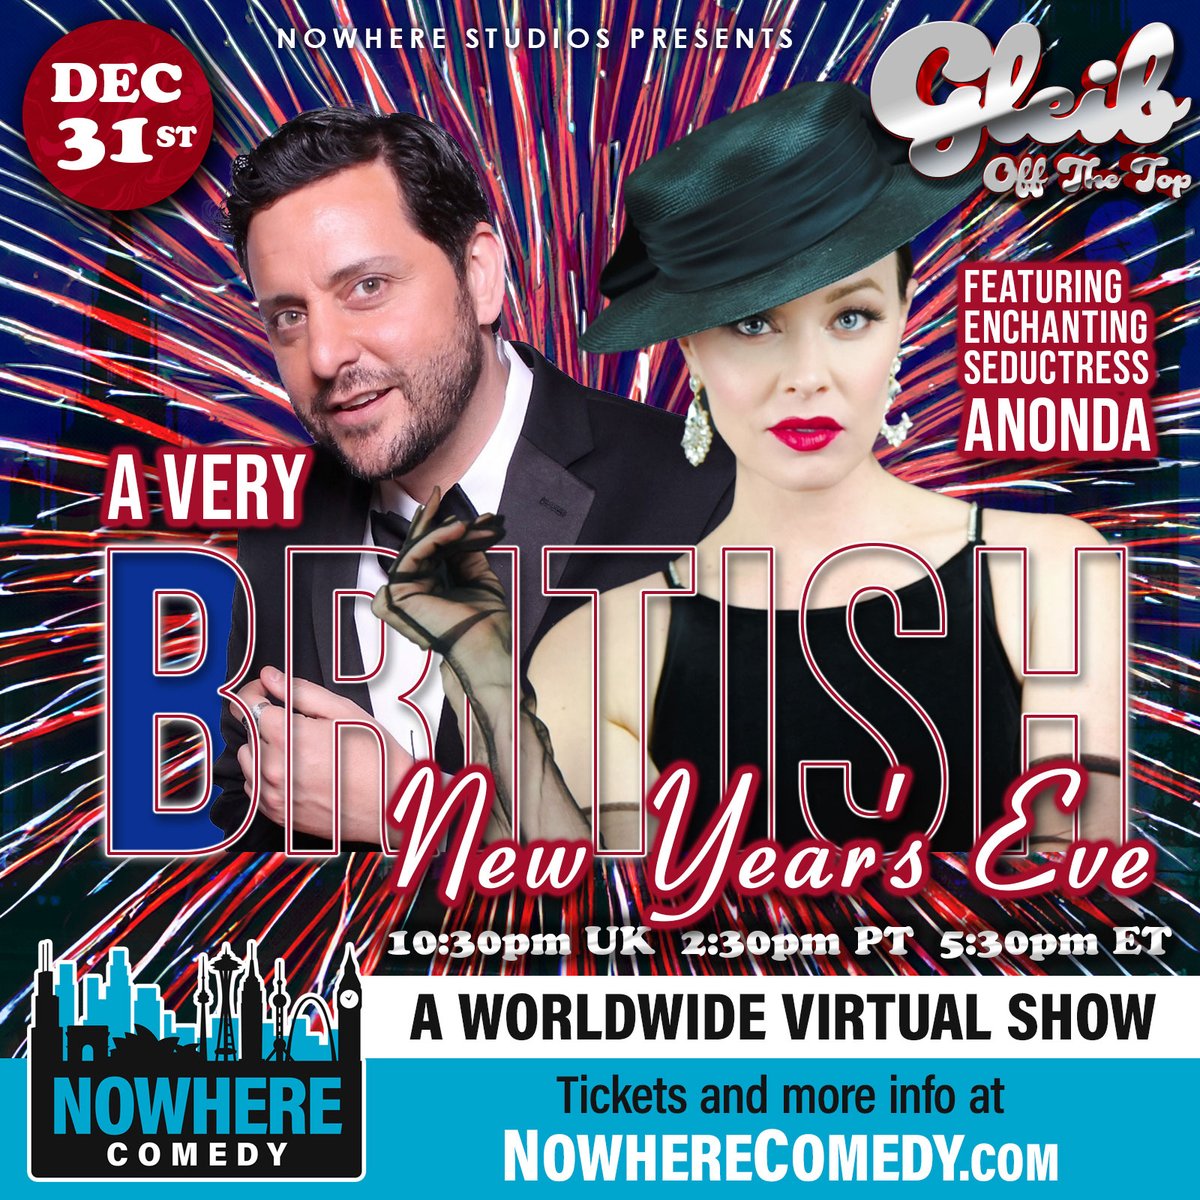 Ring in the New Year with 'A Very British New Year's Eve Gleib Off The Top!' Join @bengleib at 10:30pm UK / 2:30pm PT / 5:30pm ET for epic improv, laughs, and a VIP Meet & Greet. A special guest & unforgettable moments await! Join the fun: NowhereComedy.com